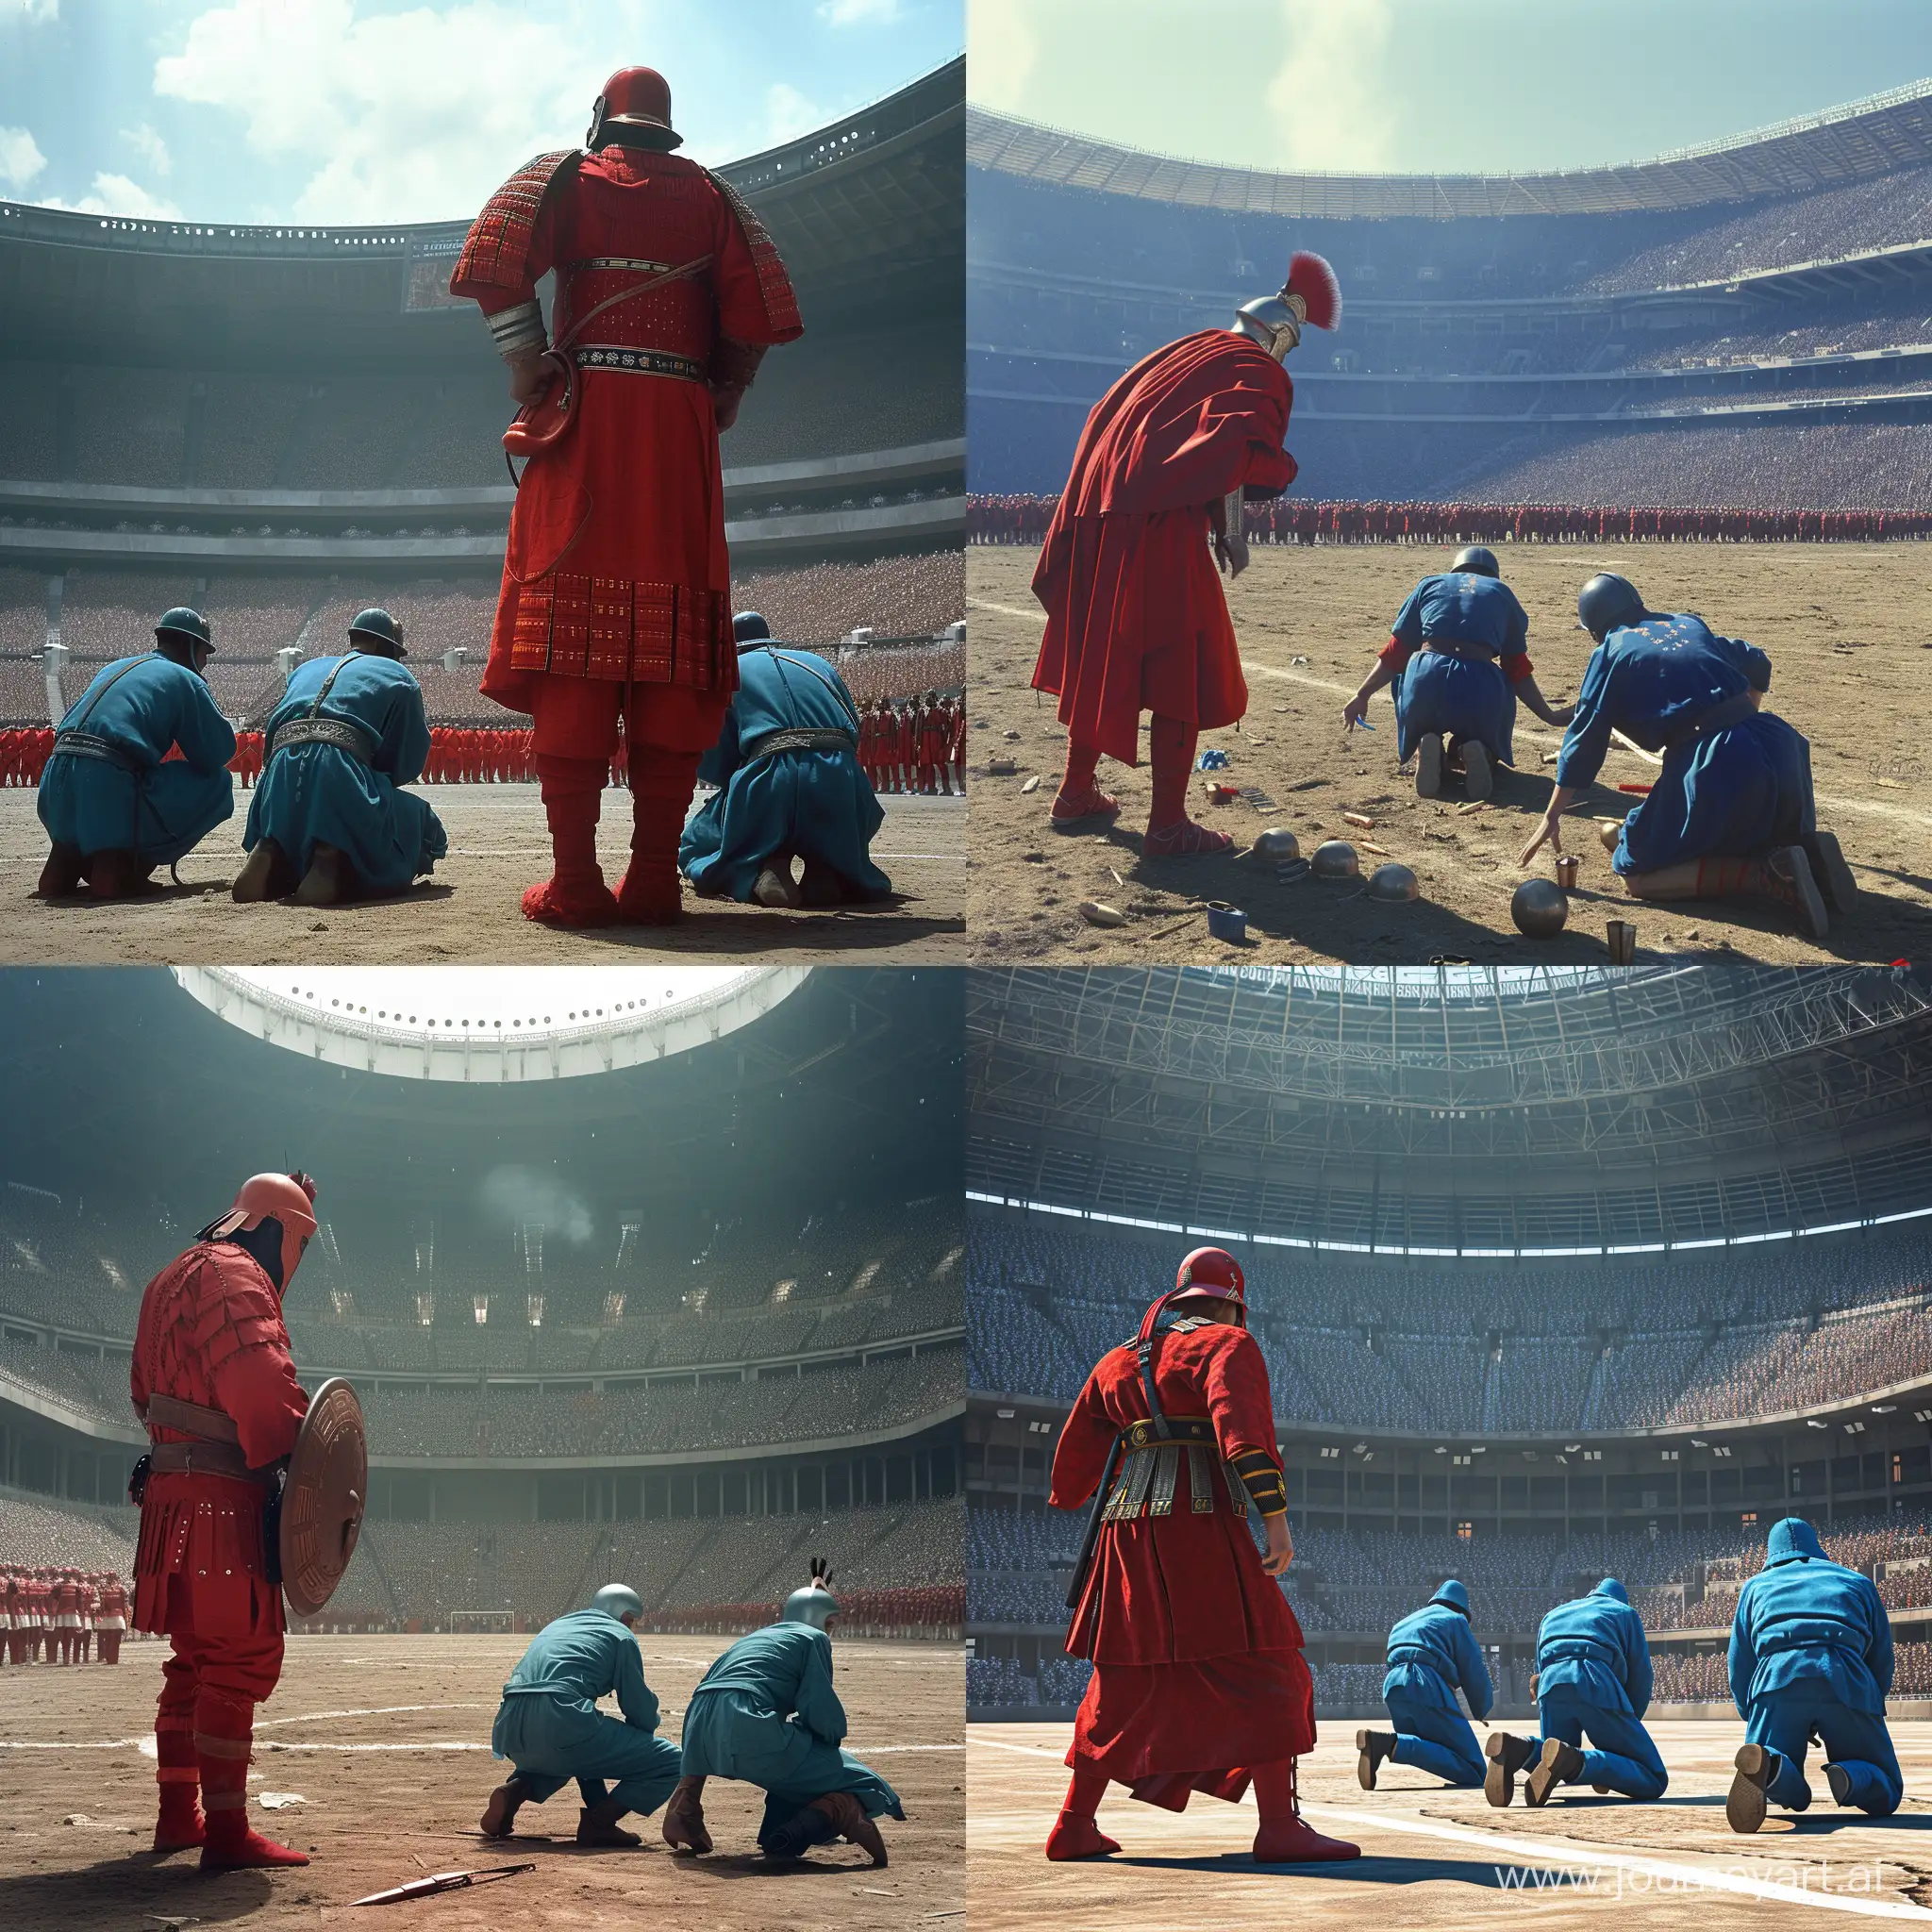 A red-clad Achaemenid soldier in a large football stadium, where three blue-clad Japanese soldiers kneel down and surrender in defeat.